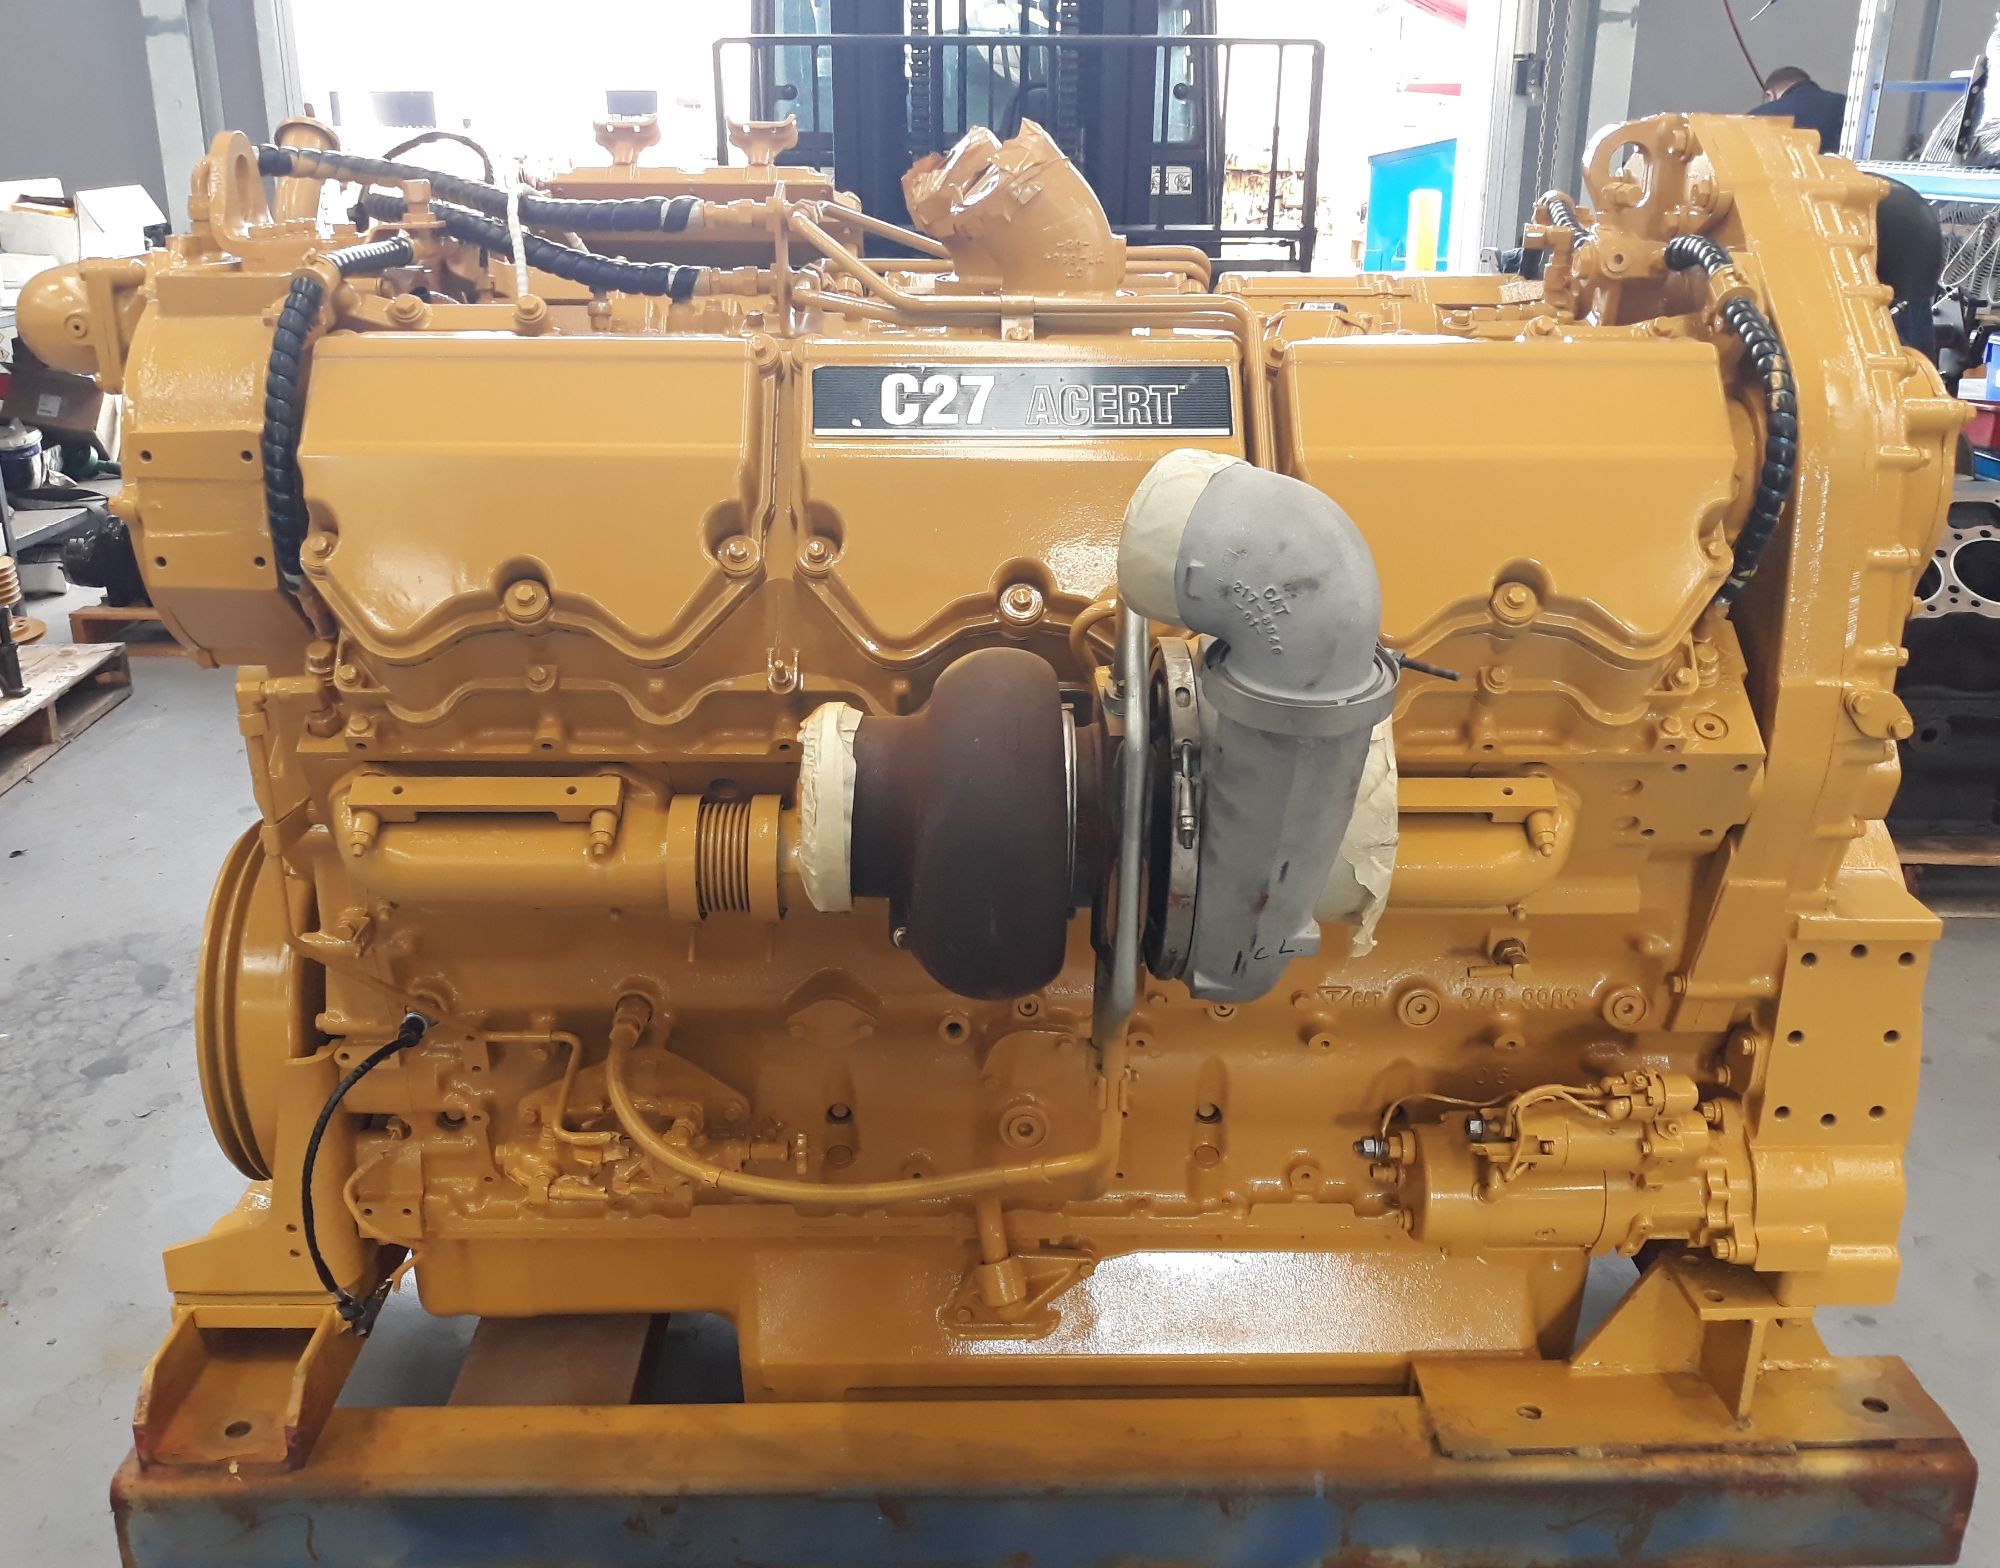 CAT C27 Acert Fully Remanufactured by Bells Engines in Australia.jpg